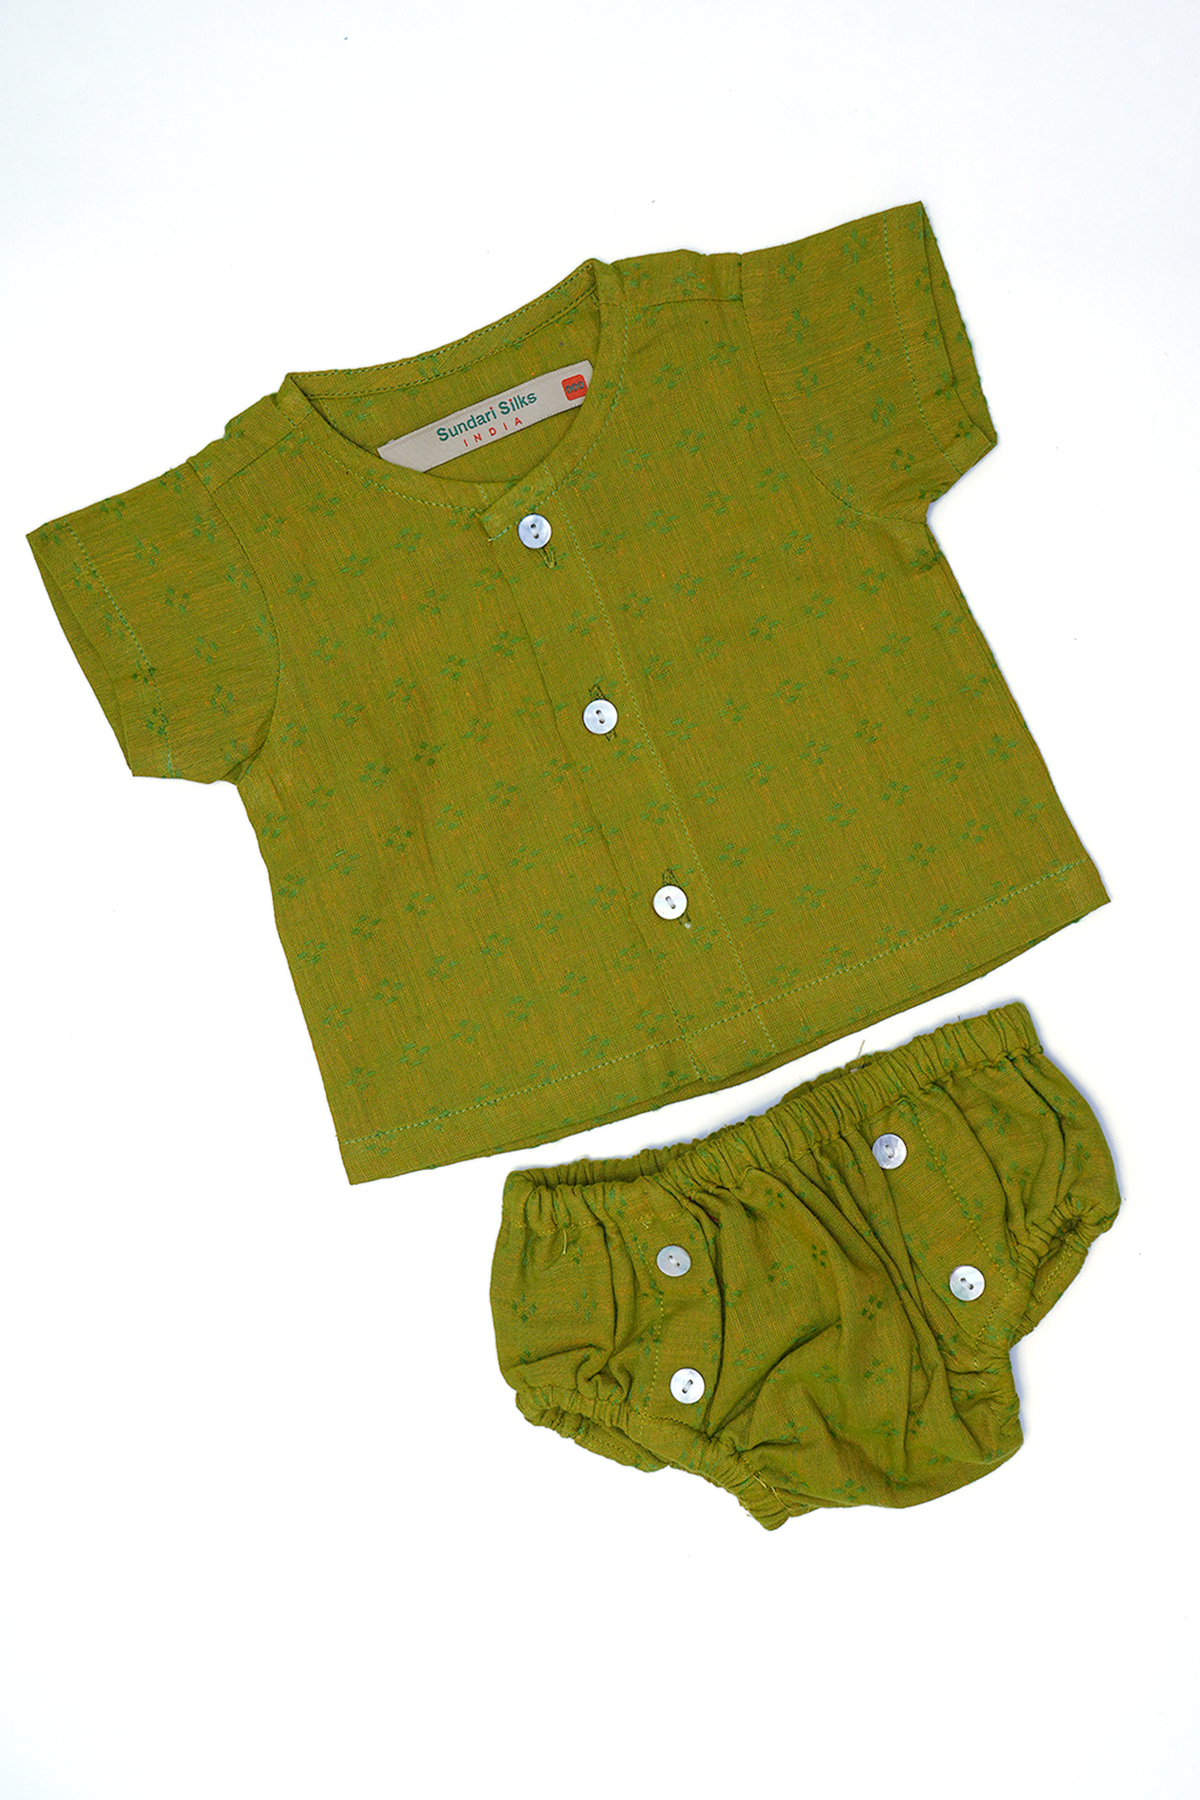 A-Line Pear Green Top And Diaper Infant Wear Boys Co-Ord Set Of 2